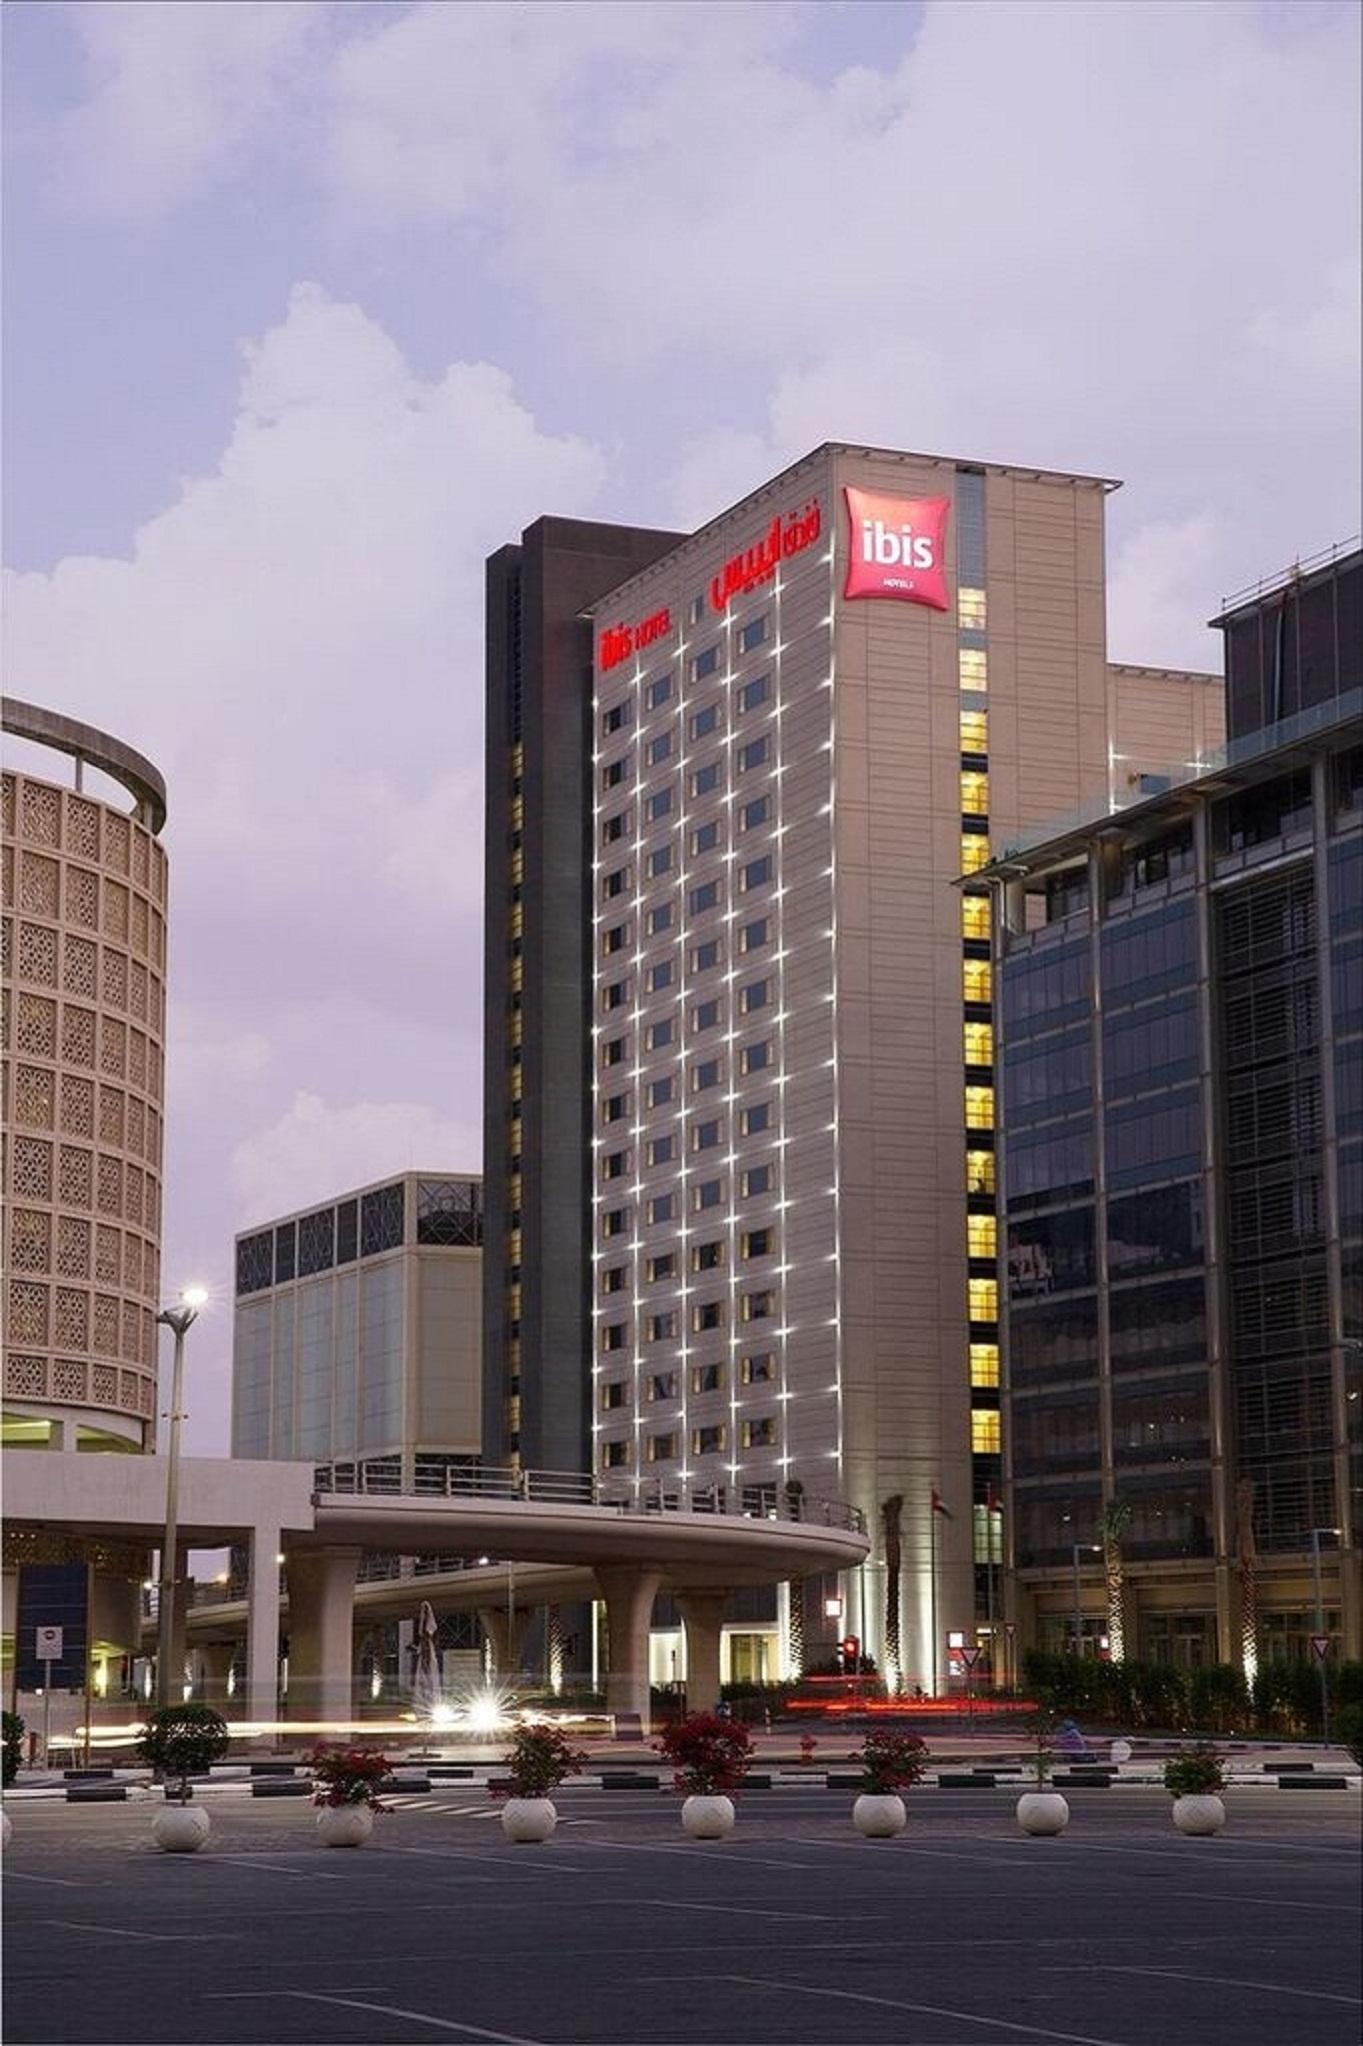 Hotel ibis One Central